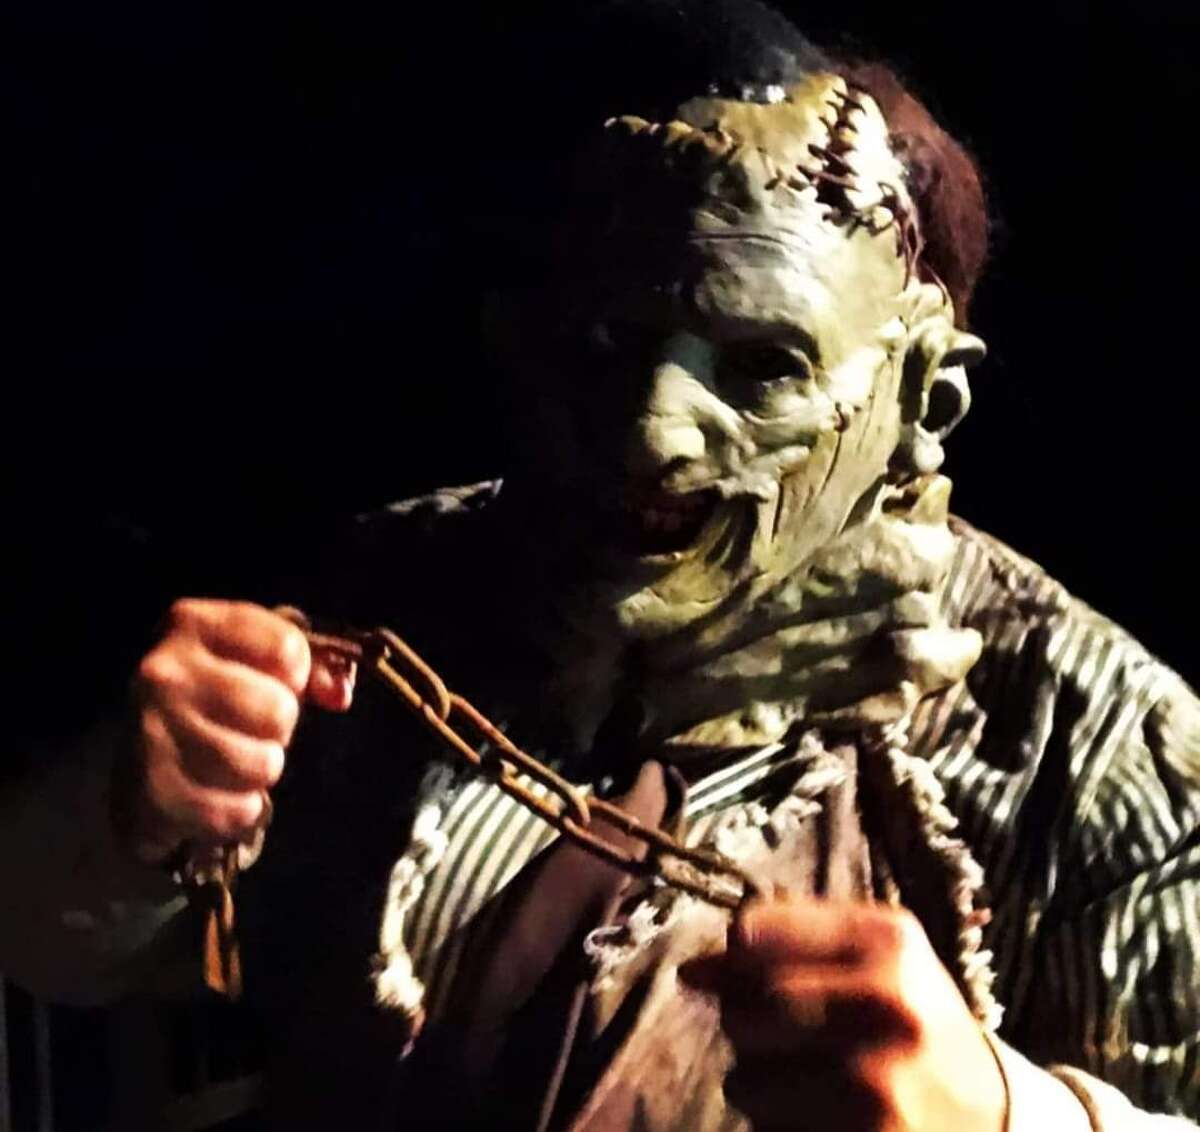 Drew Riley, dressed as Leatherface, will join fellow cast members at the Roodhouse Rez Haunted Hayride starting Sept. 30.